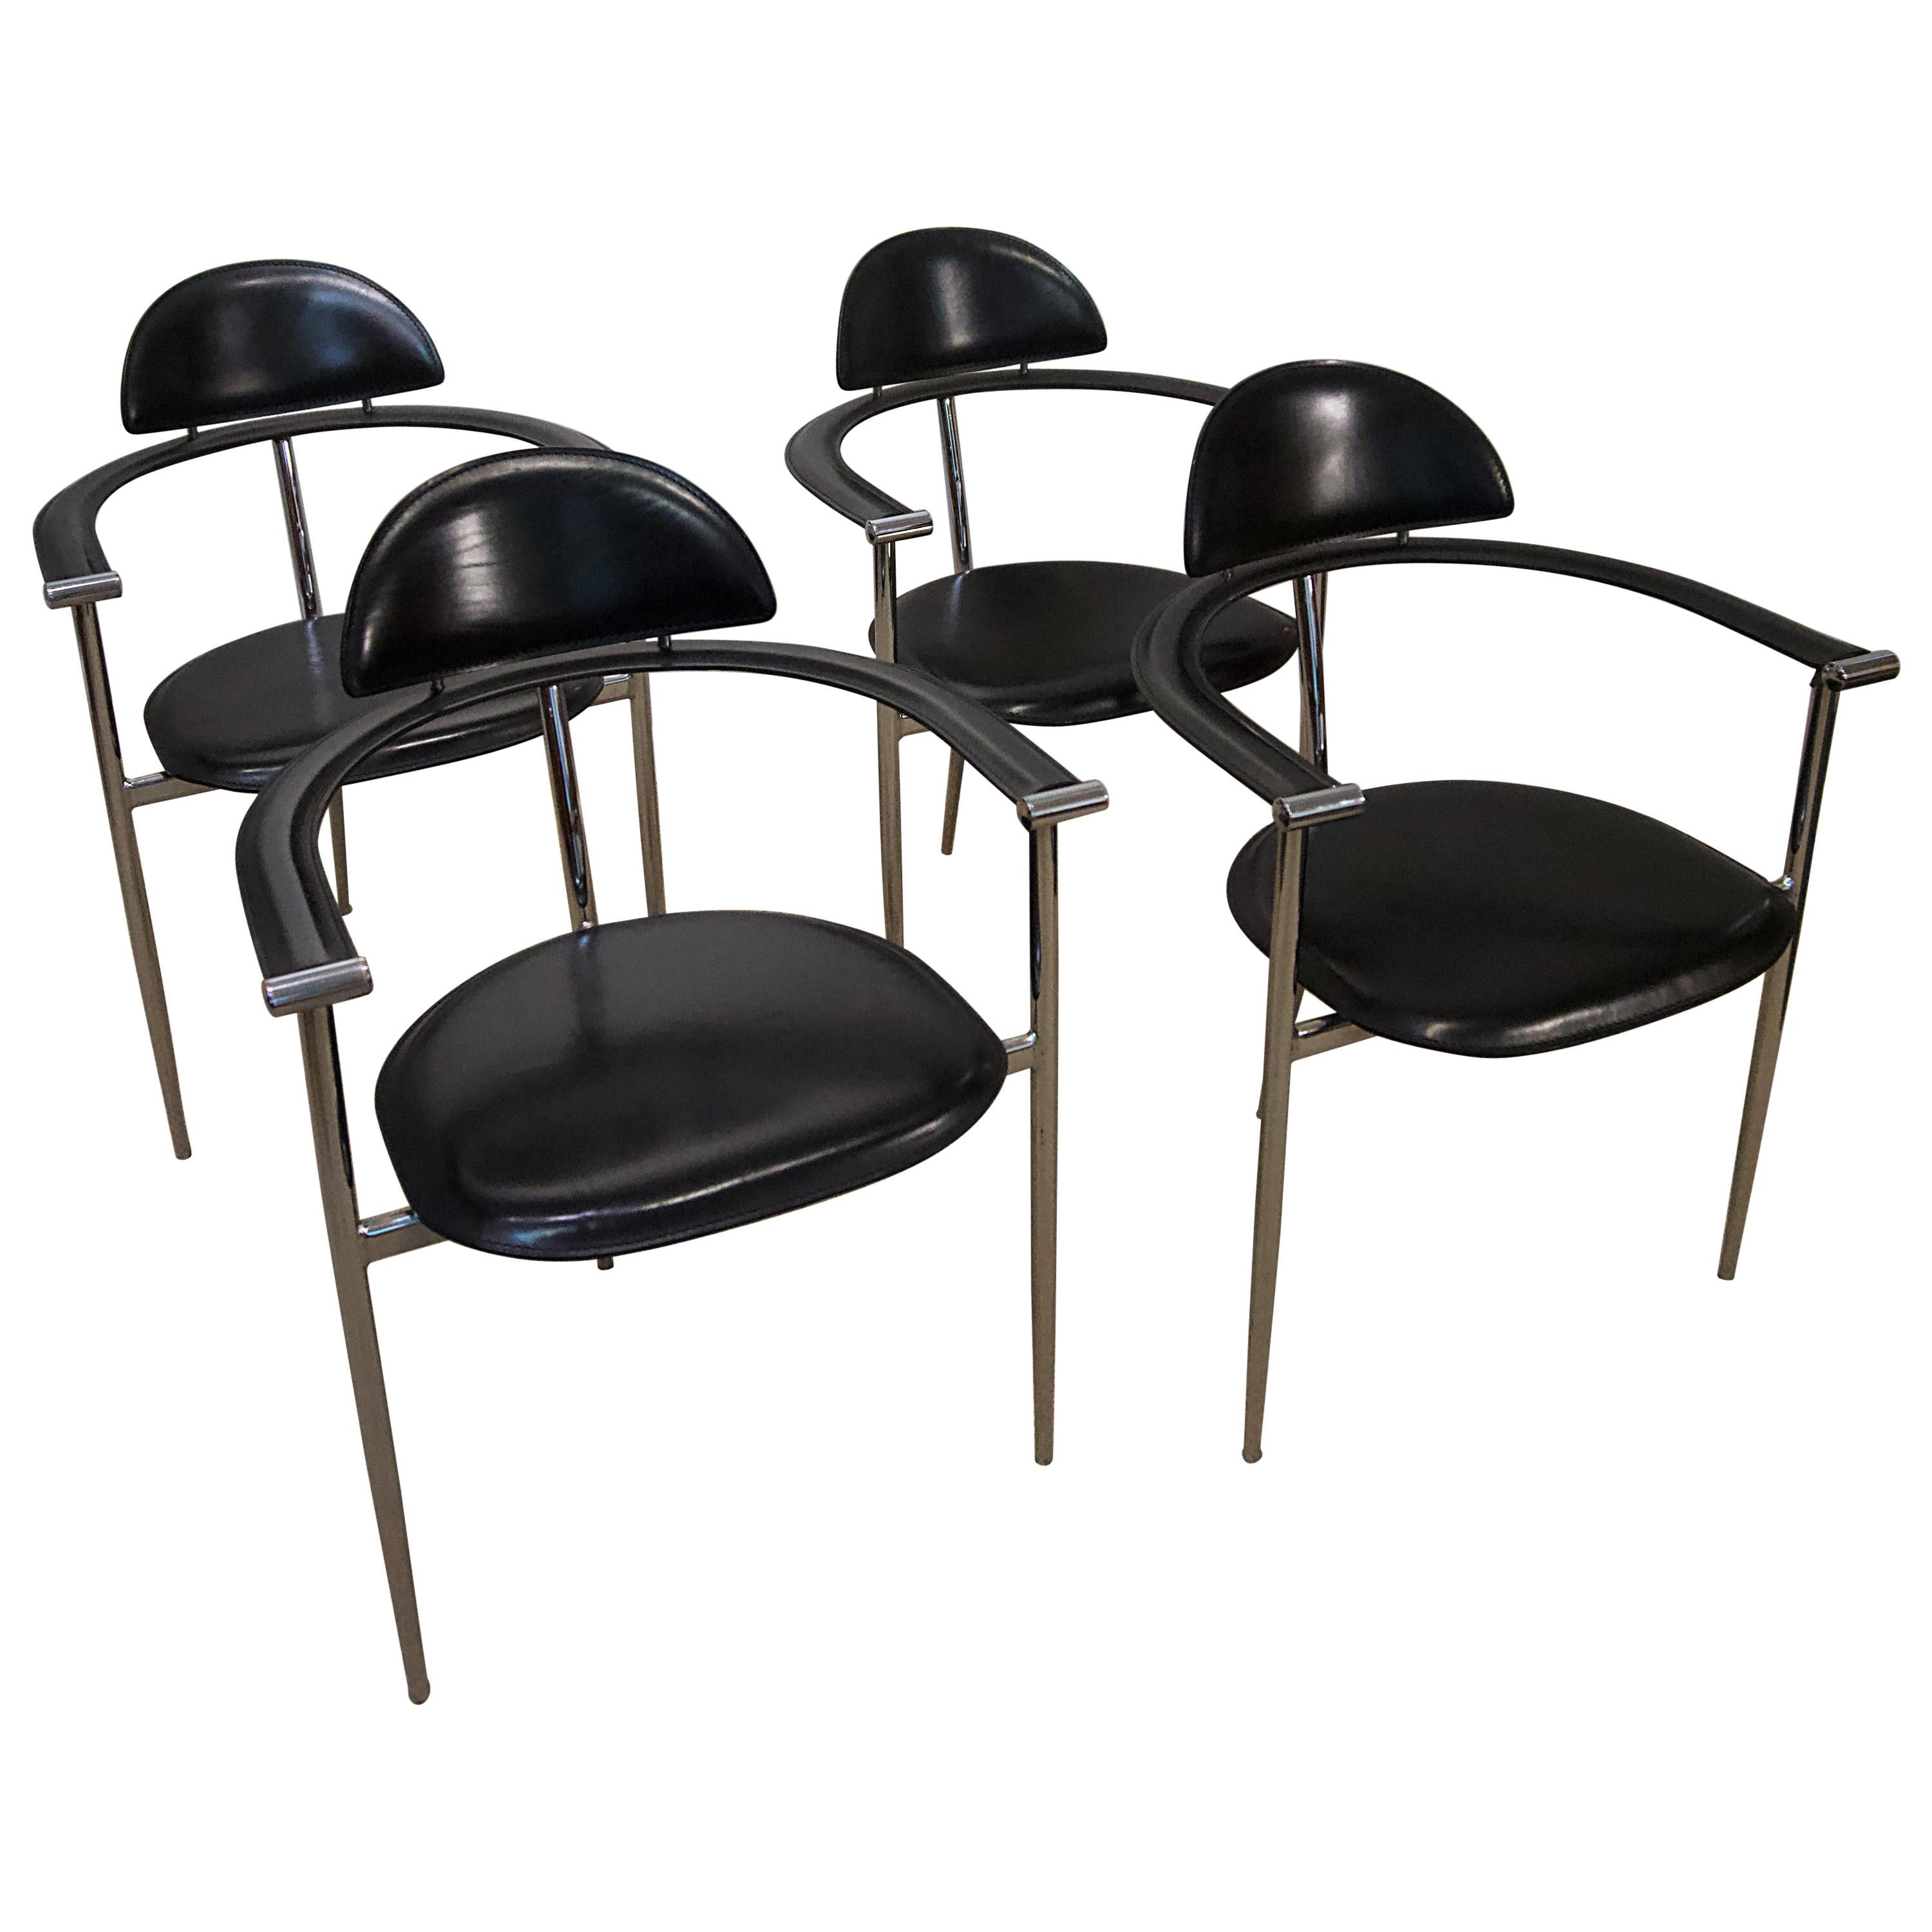 Set of 4 Italian Black Leather Stiletto Chairs by Arrben